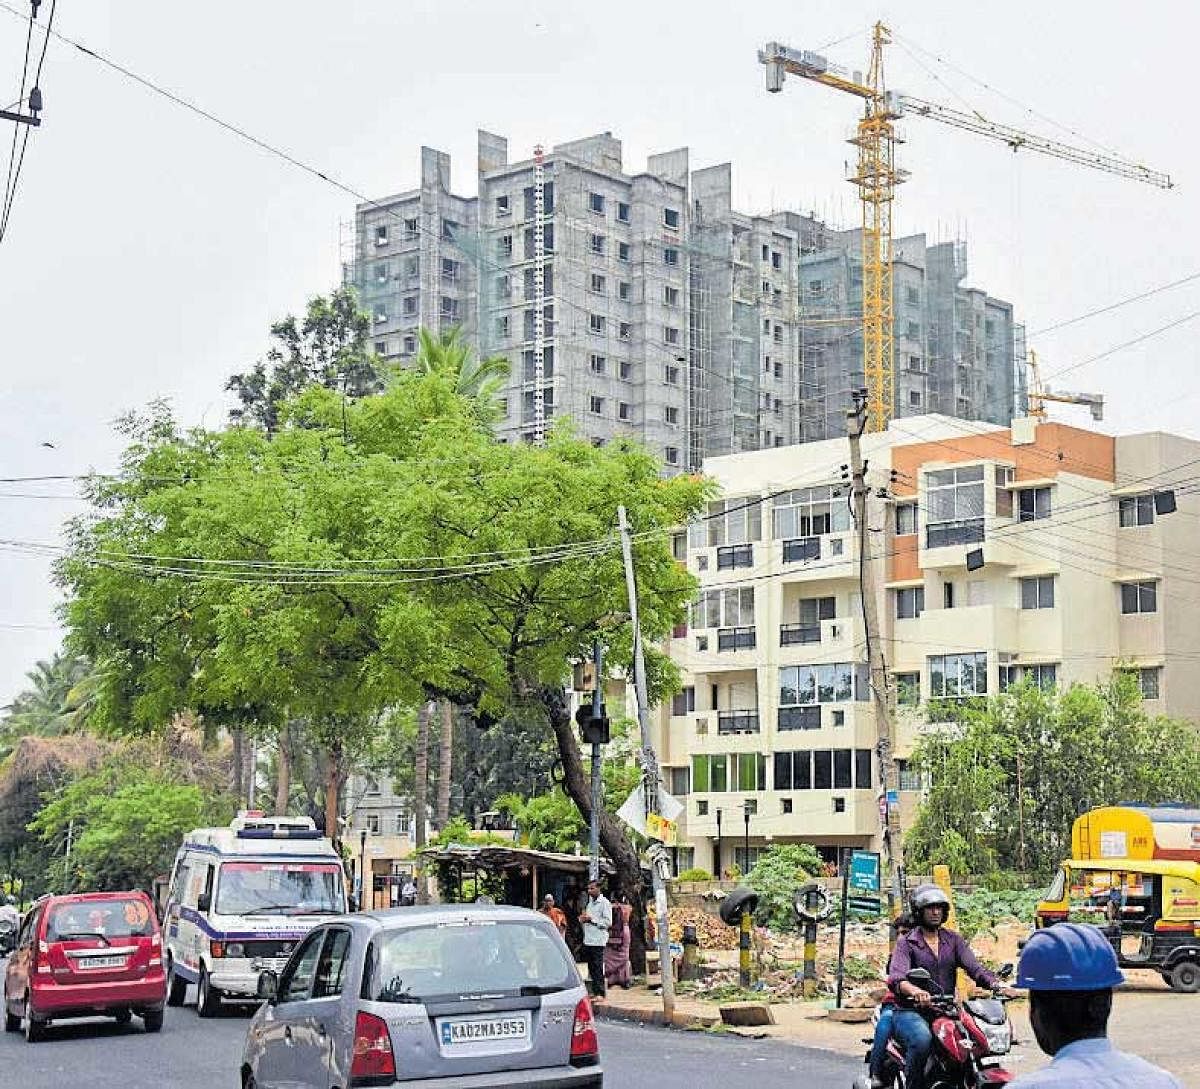 Land woes force 1-lakh housing scheme to be redone 